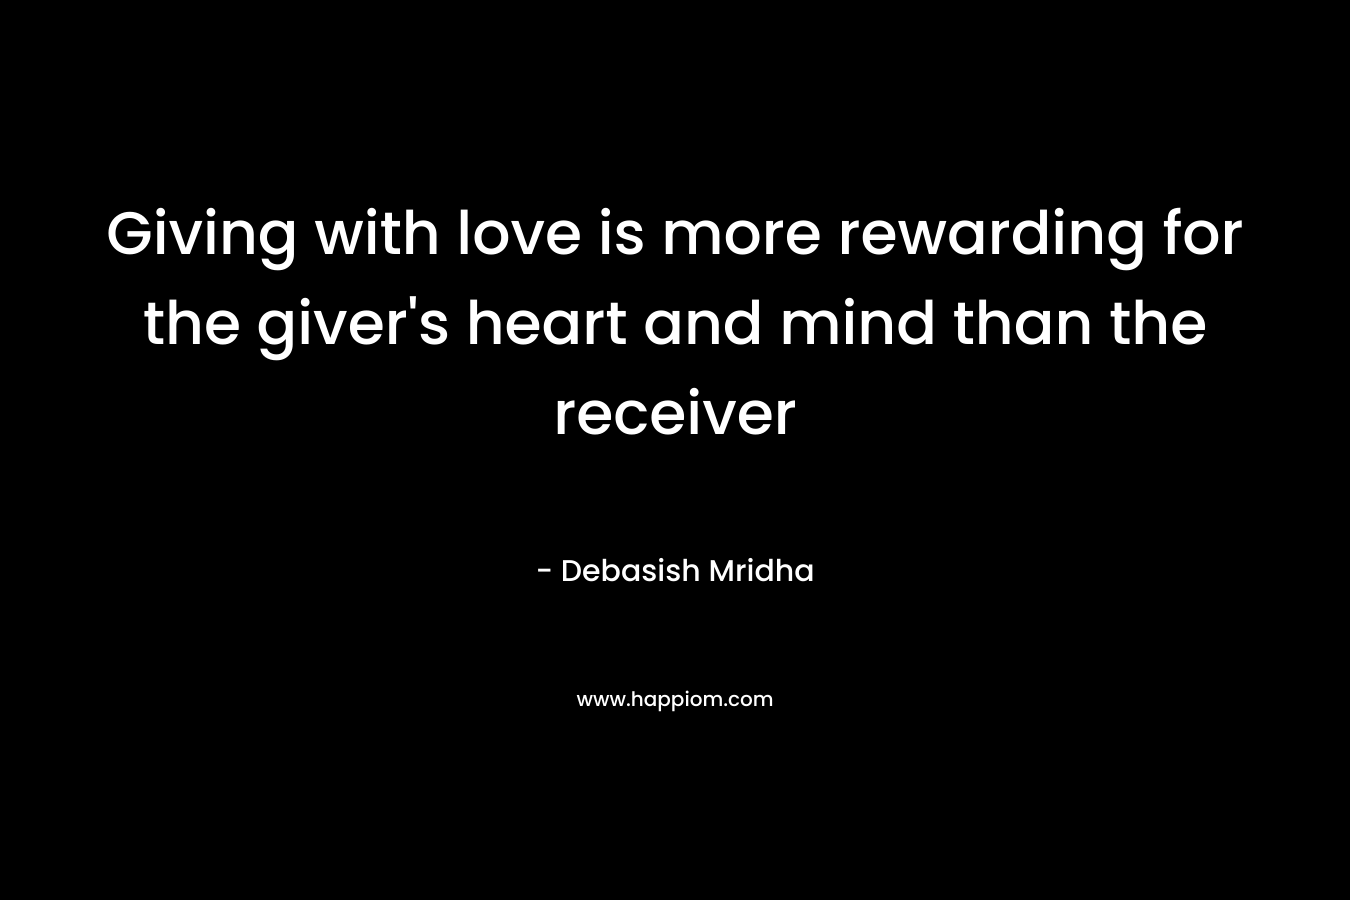 Giving with love is more rewarding for the giver’s heart and mind than the receiver – Debasish Mridha